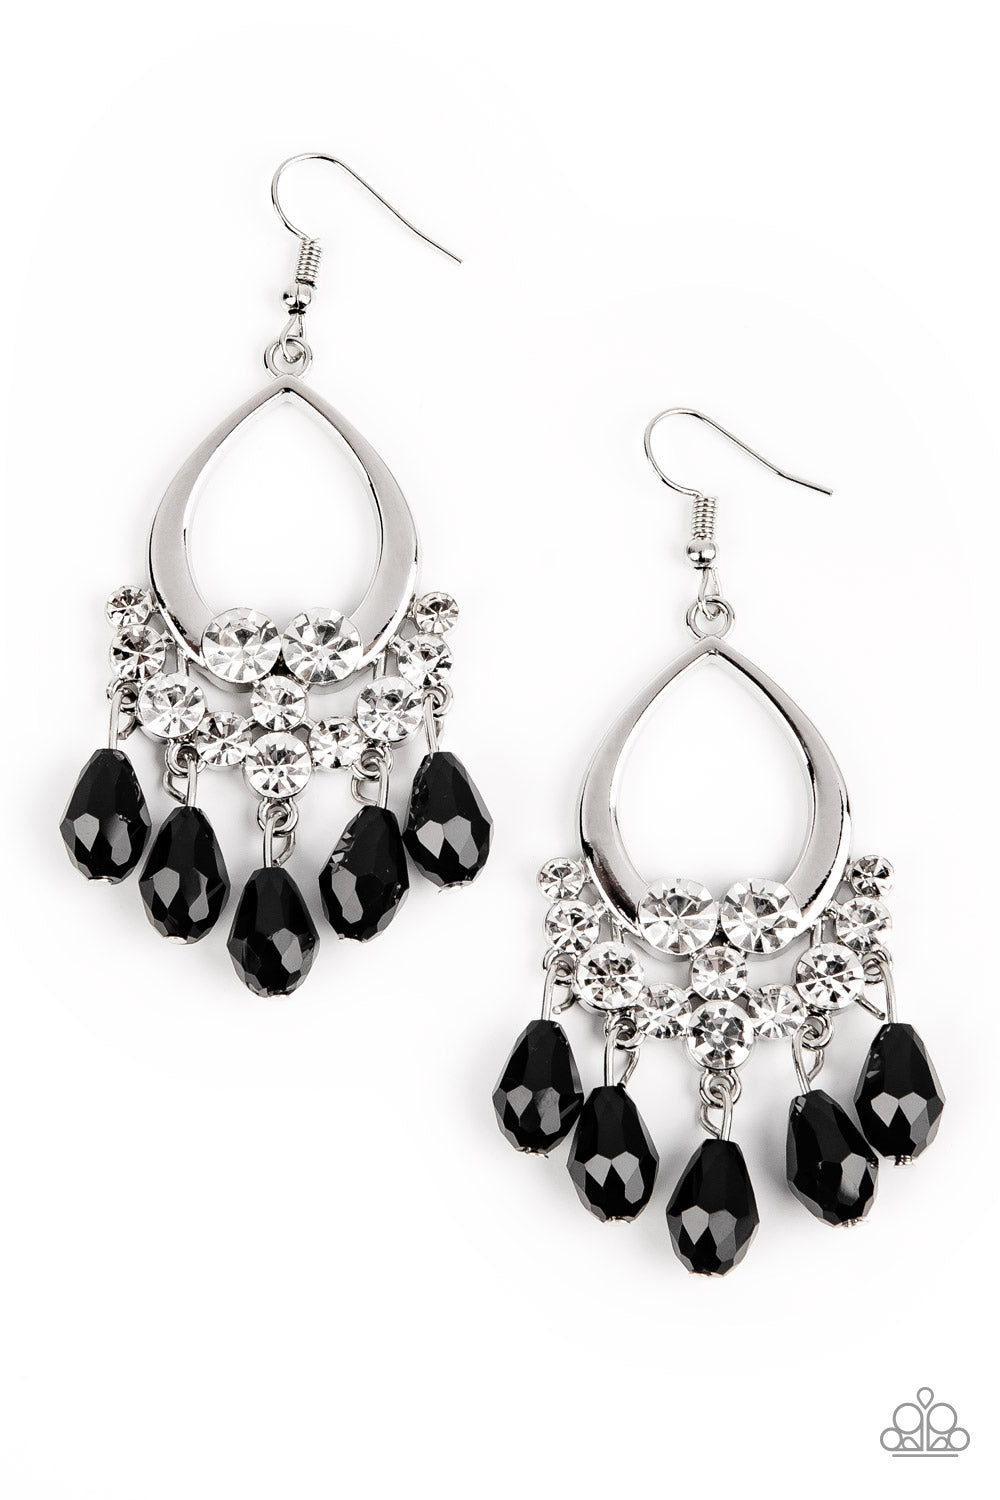 Famous Fashionista - Black Item #P5RE-BKXX-424XX Faceted black teardrop gems cascade from a collection of bubbly white rhinestones at the bottom of a shiny silver teardrop frame, creating a glamorous fringe. Earring attaches to a standard fishhook fitting.  Sold as one pair of earrings.